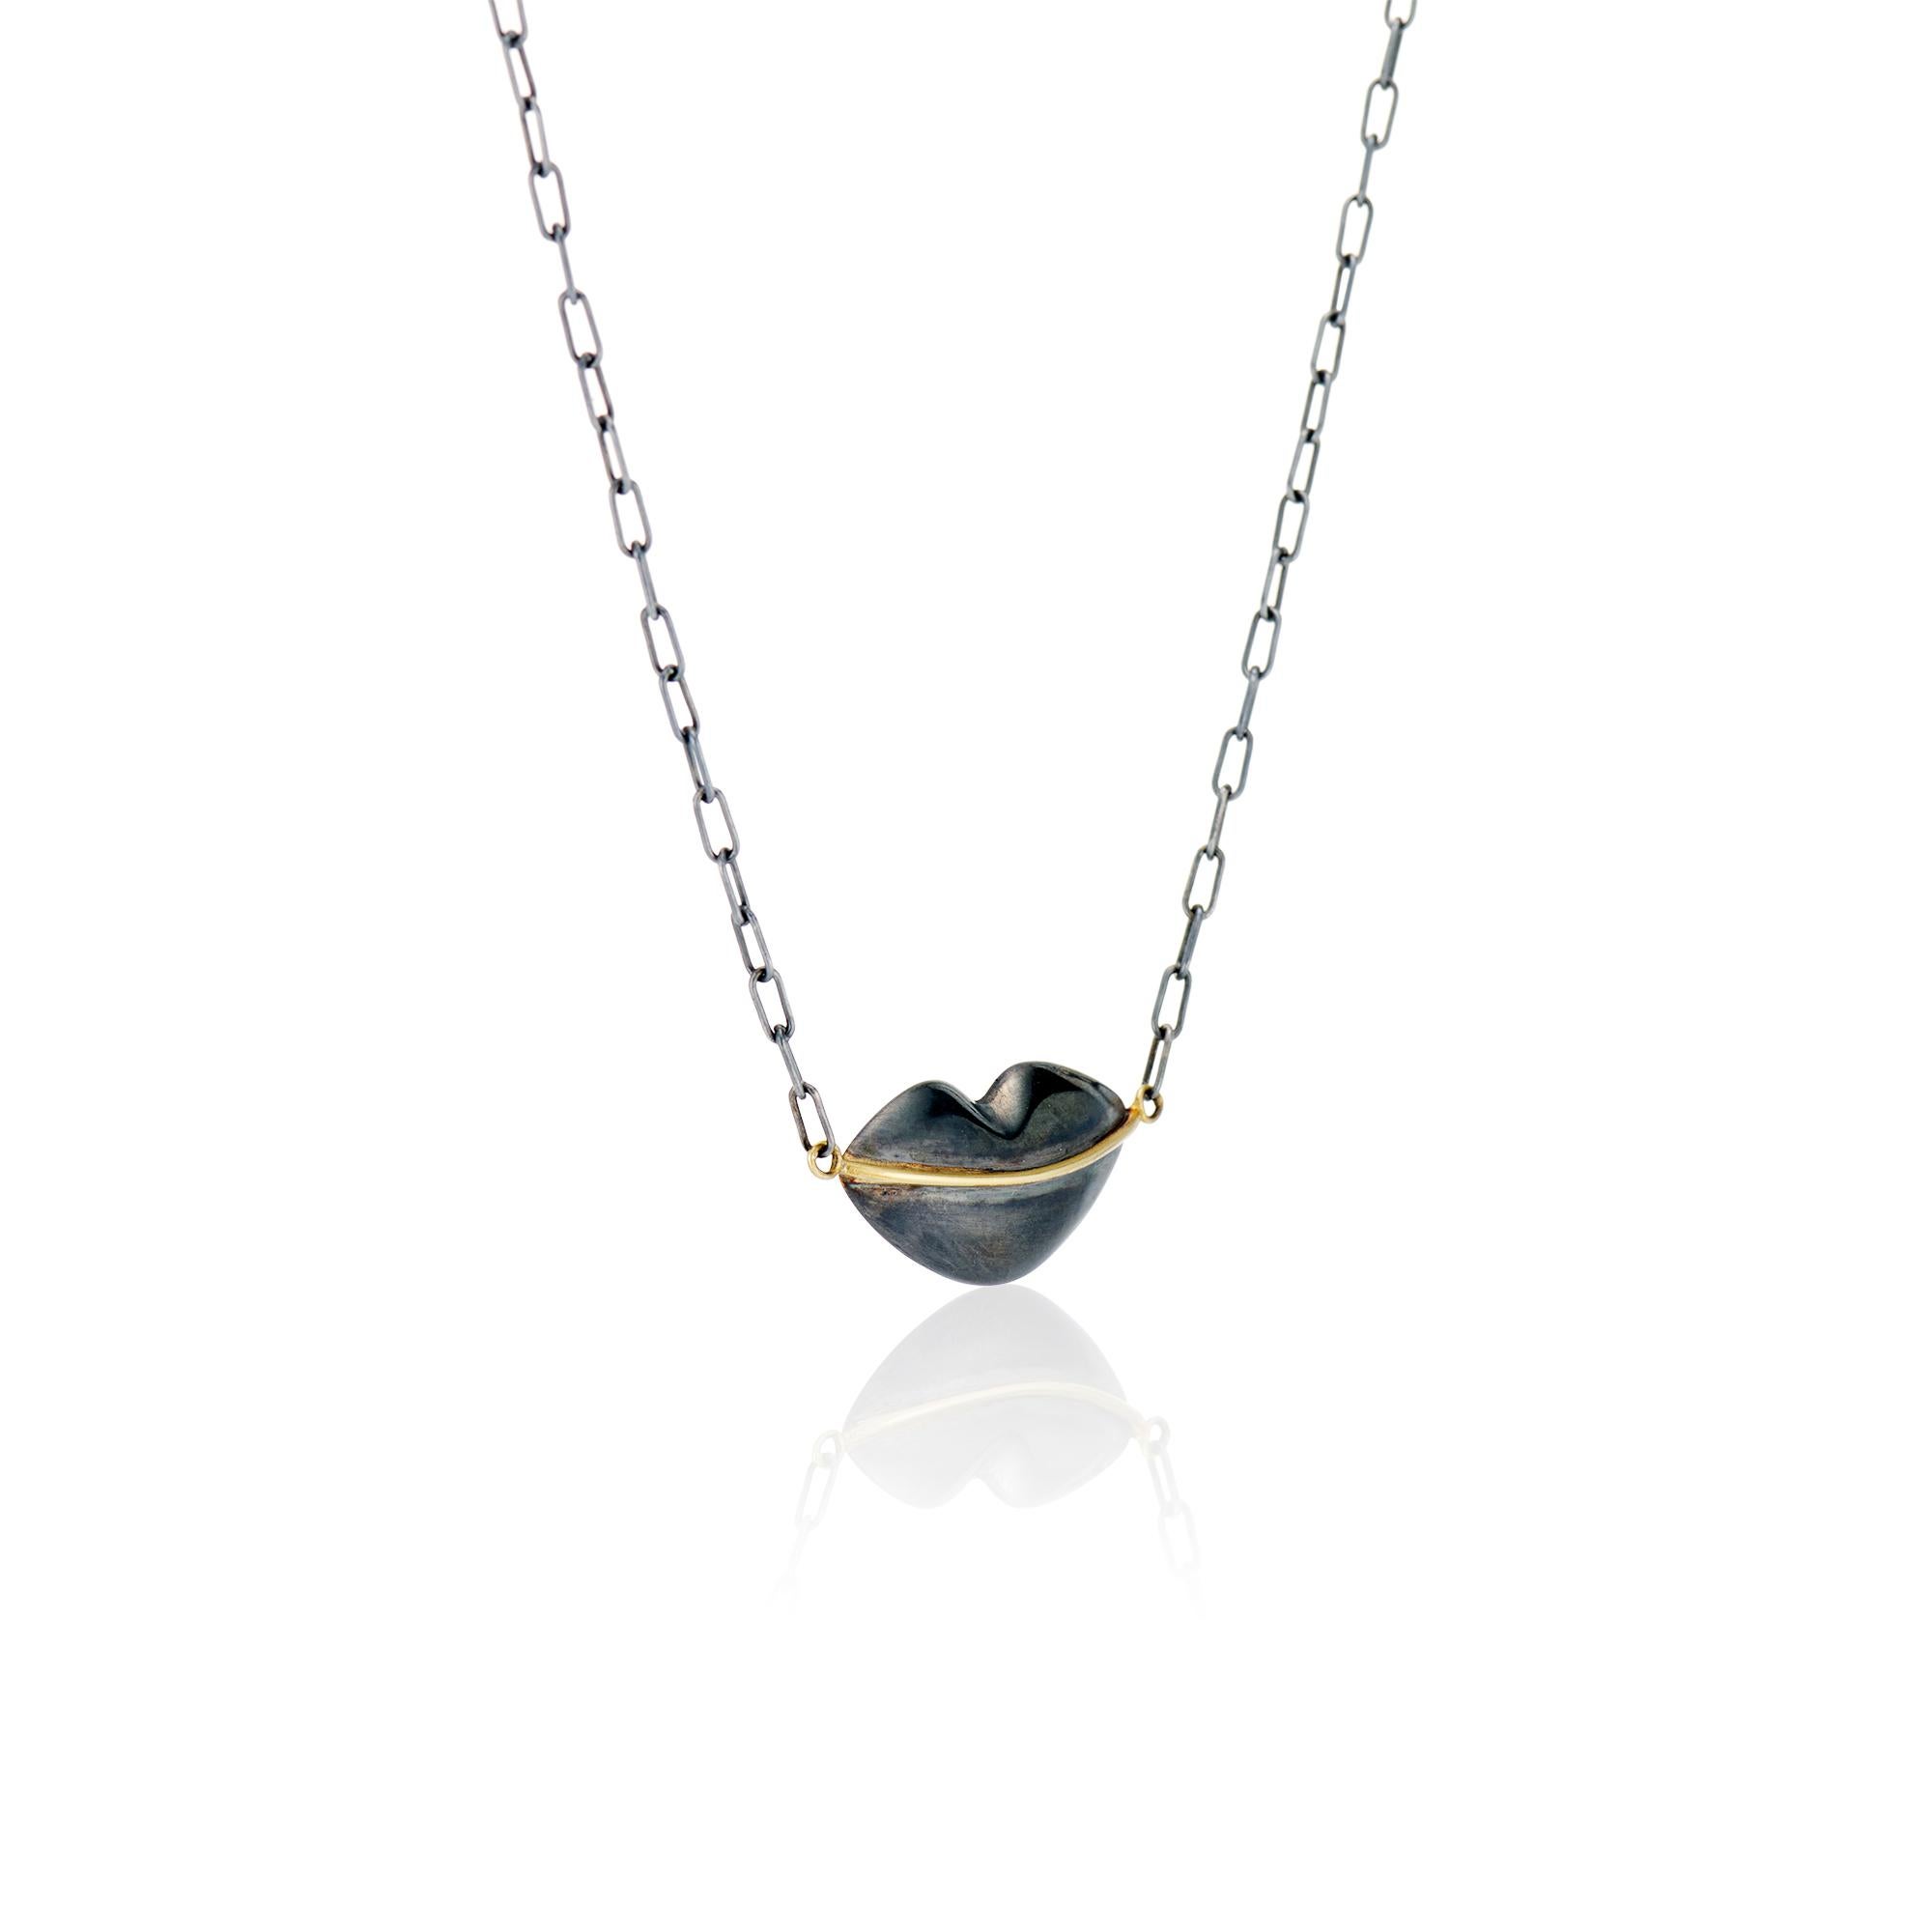 Contemporary Deborah Meyers Experience Oxidized Sterling Silver Lips, Pendant Necklace